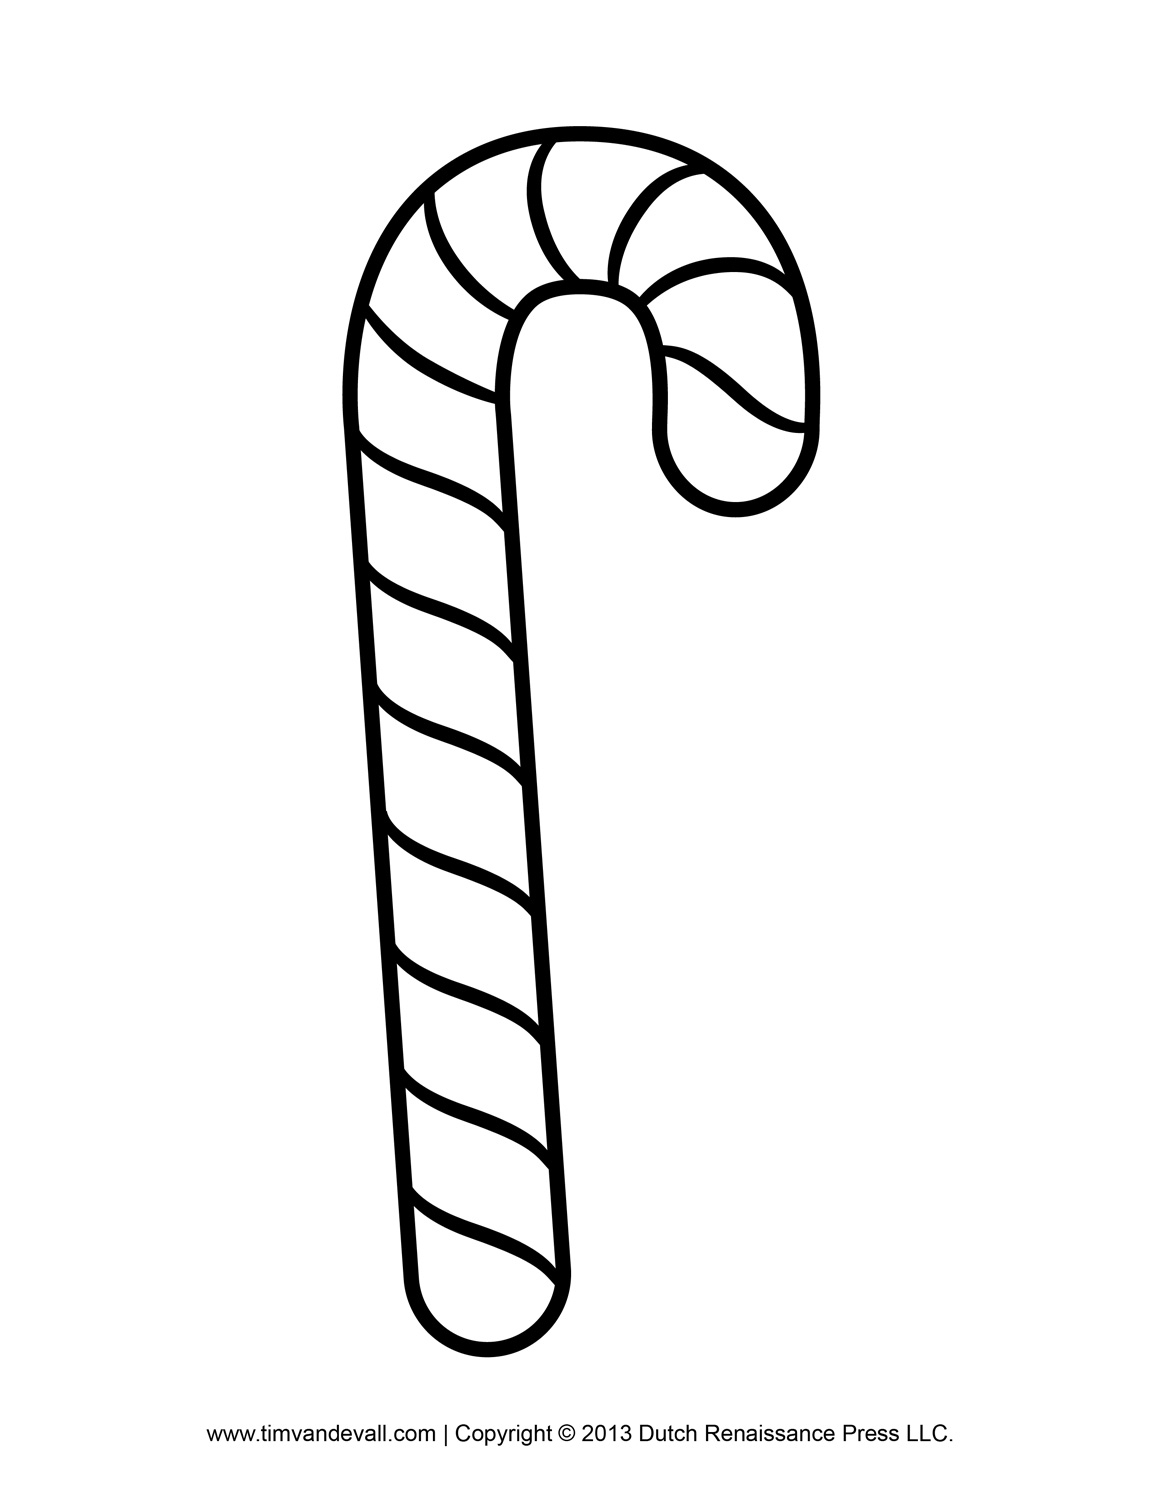 Free Candy Cane Template Printables Clip Art 2 - Clipartix - Free Printable Candy Cane